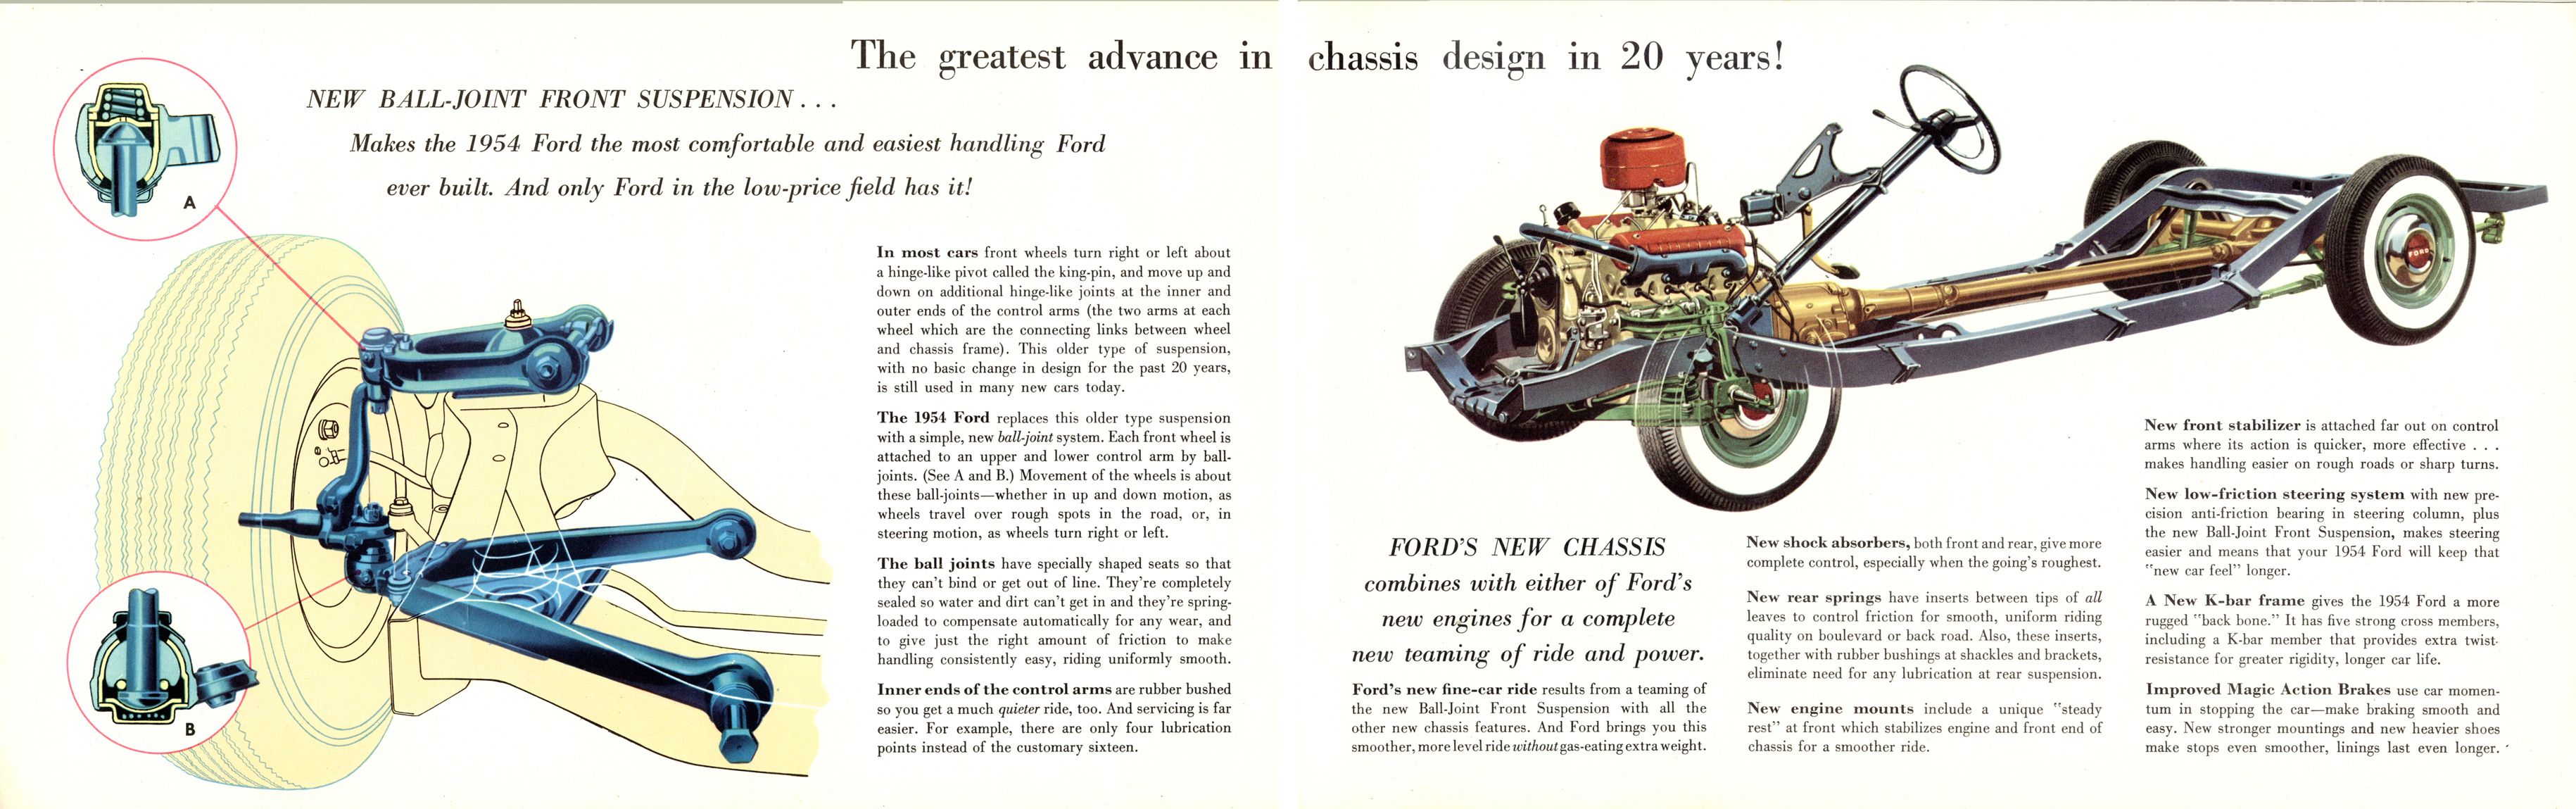 1954_Ford-22-23